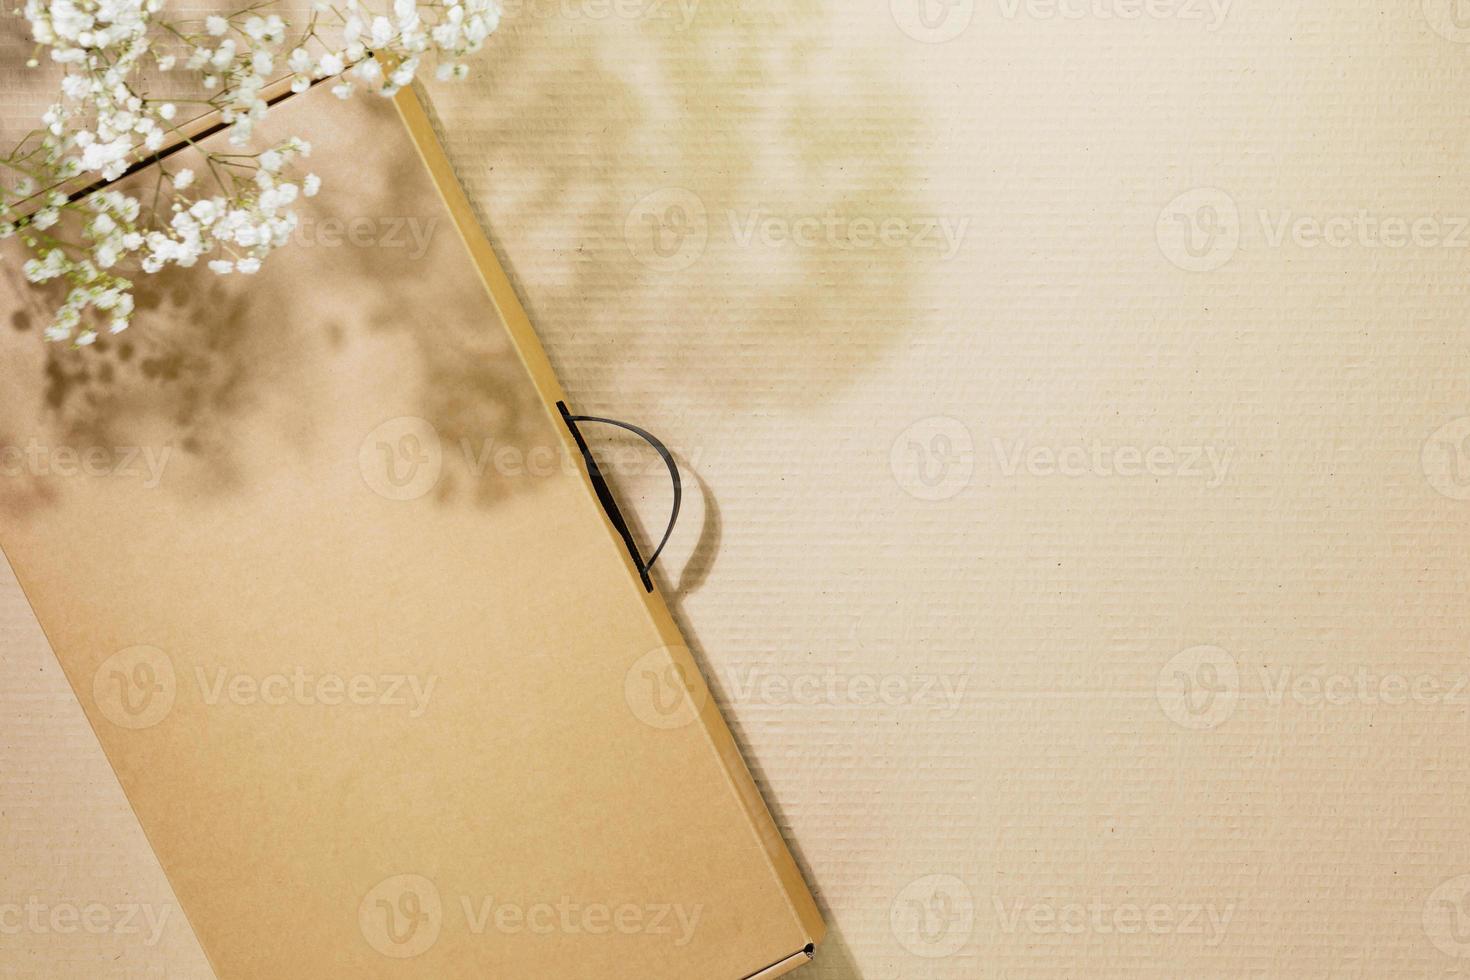 Cardboard box on cardboard background with white flowers and copy space photo